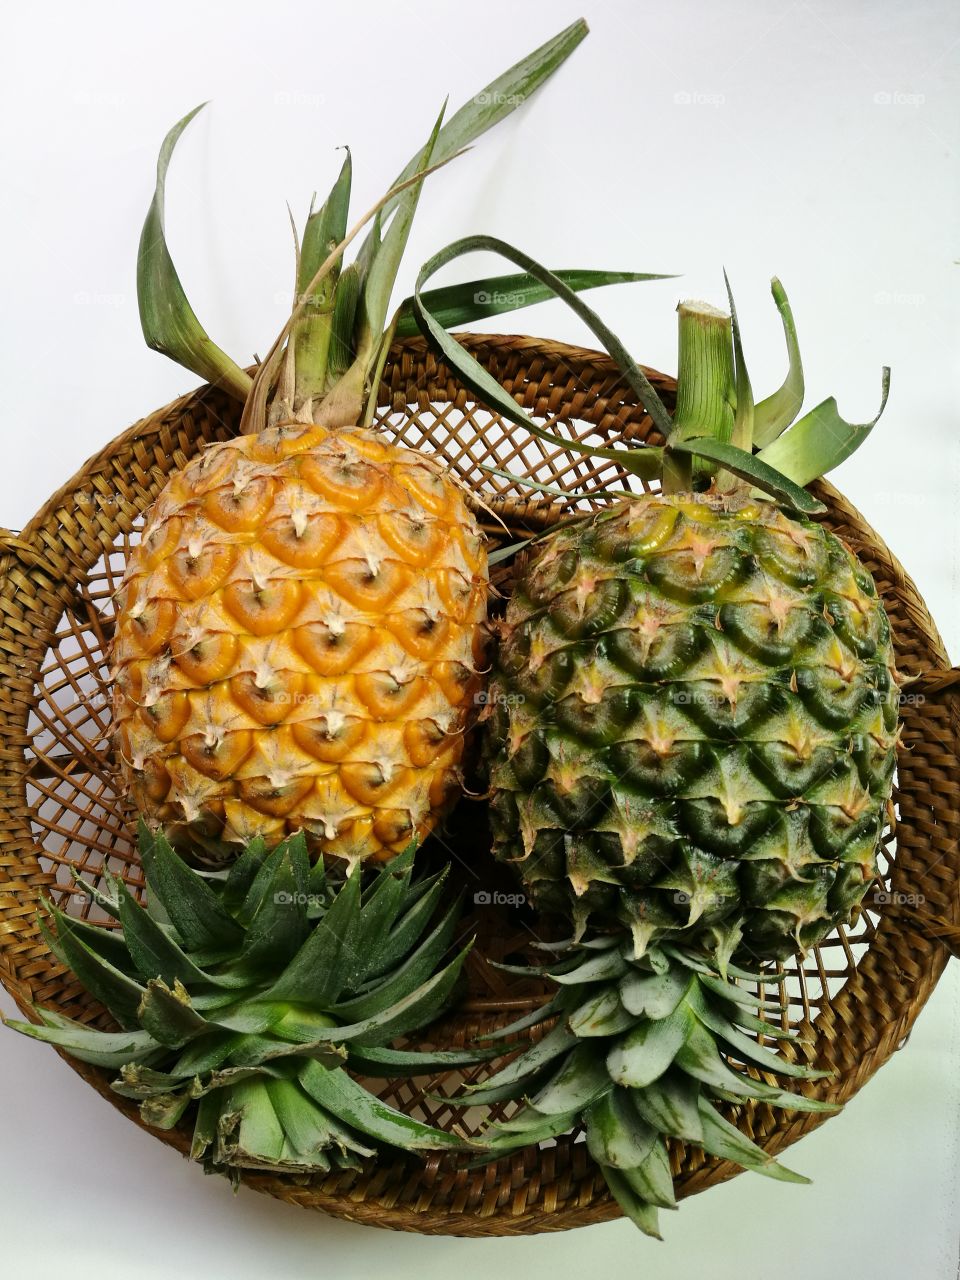 Top view of pineapples in rattan basket on white background.